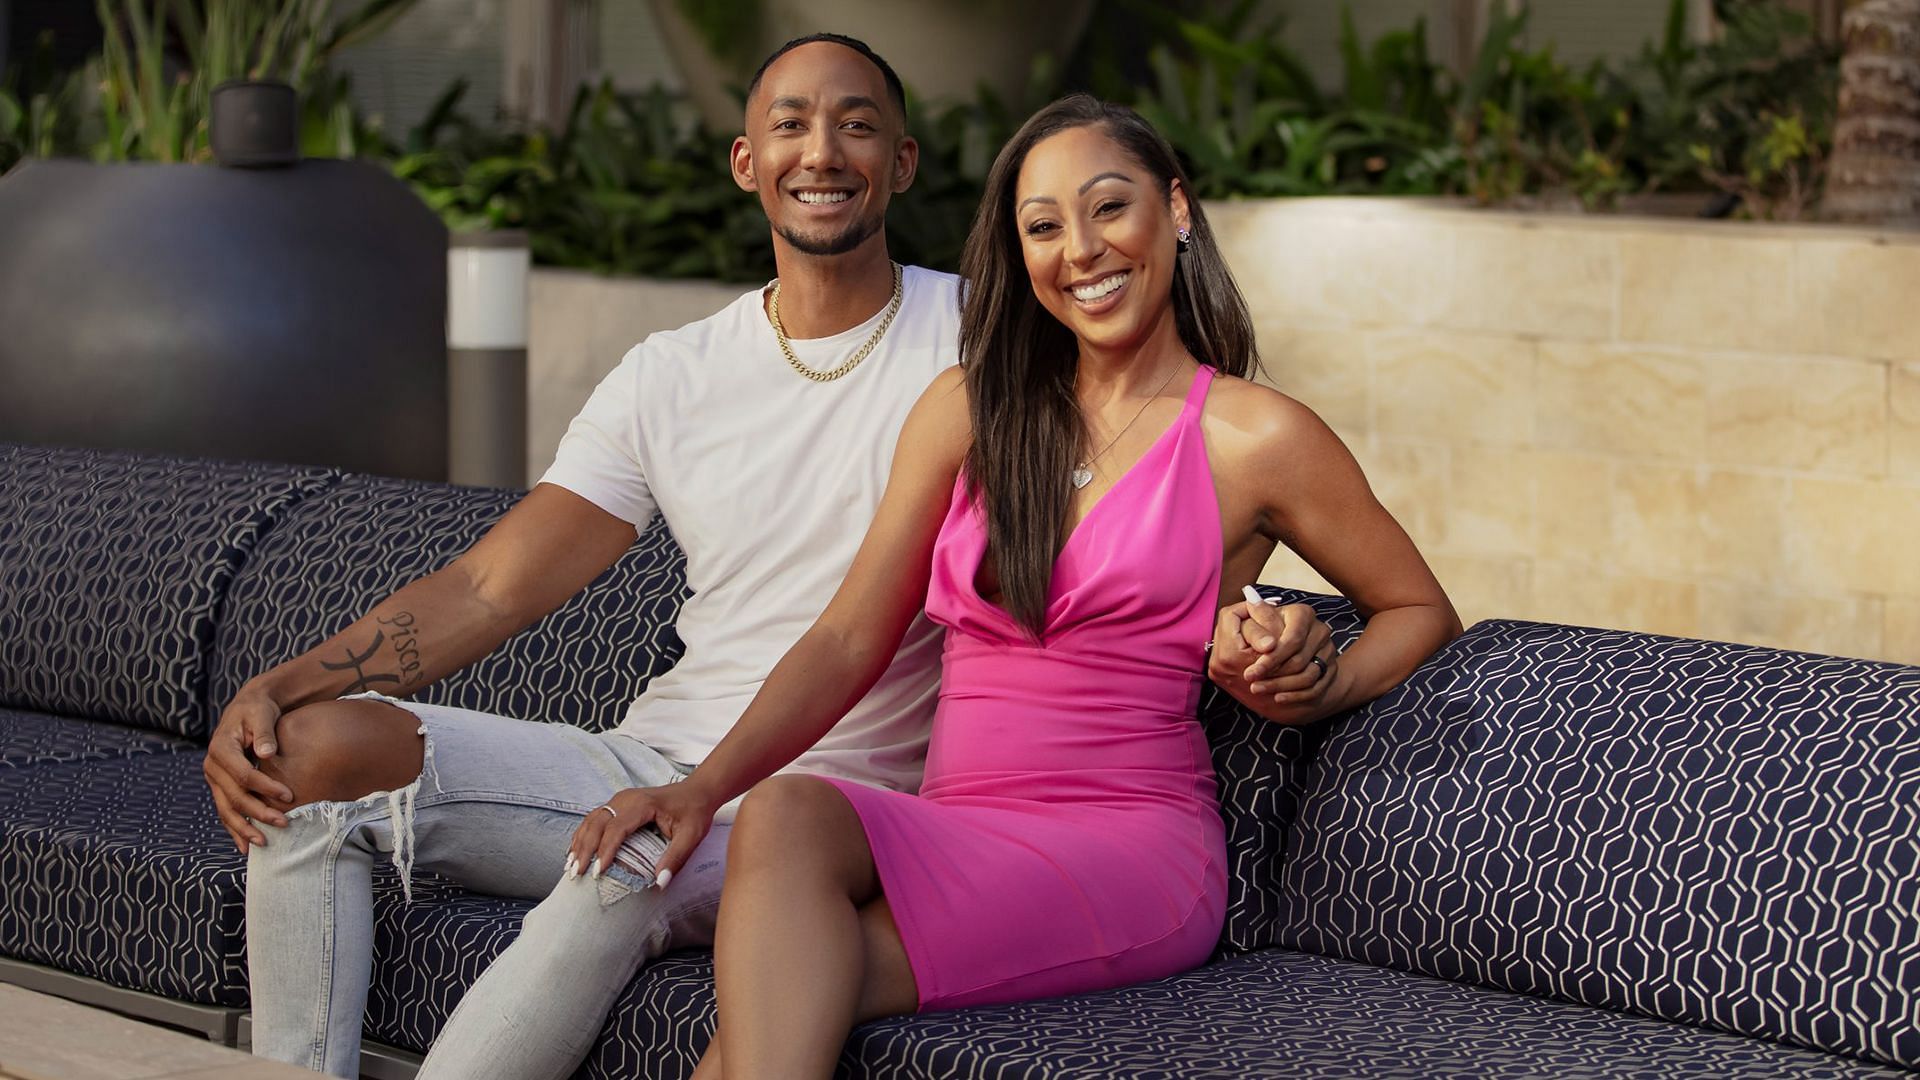 Stacia and Nate to appear on Married at First Sight (Image via Lifetime)